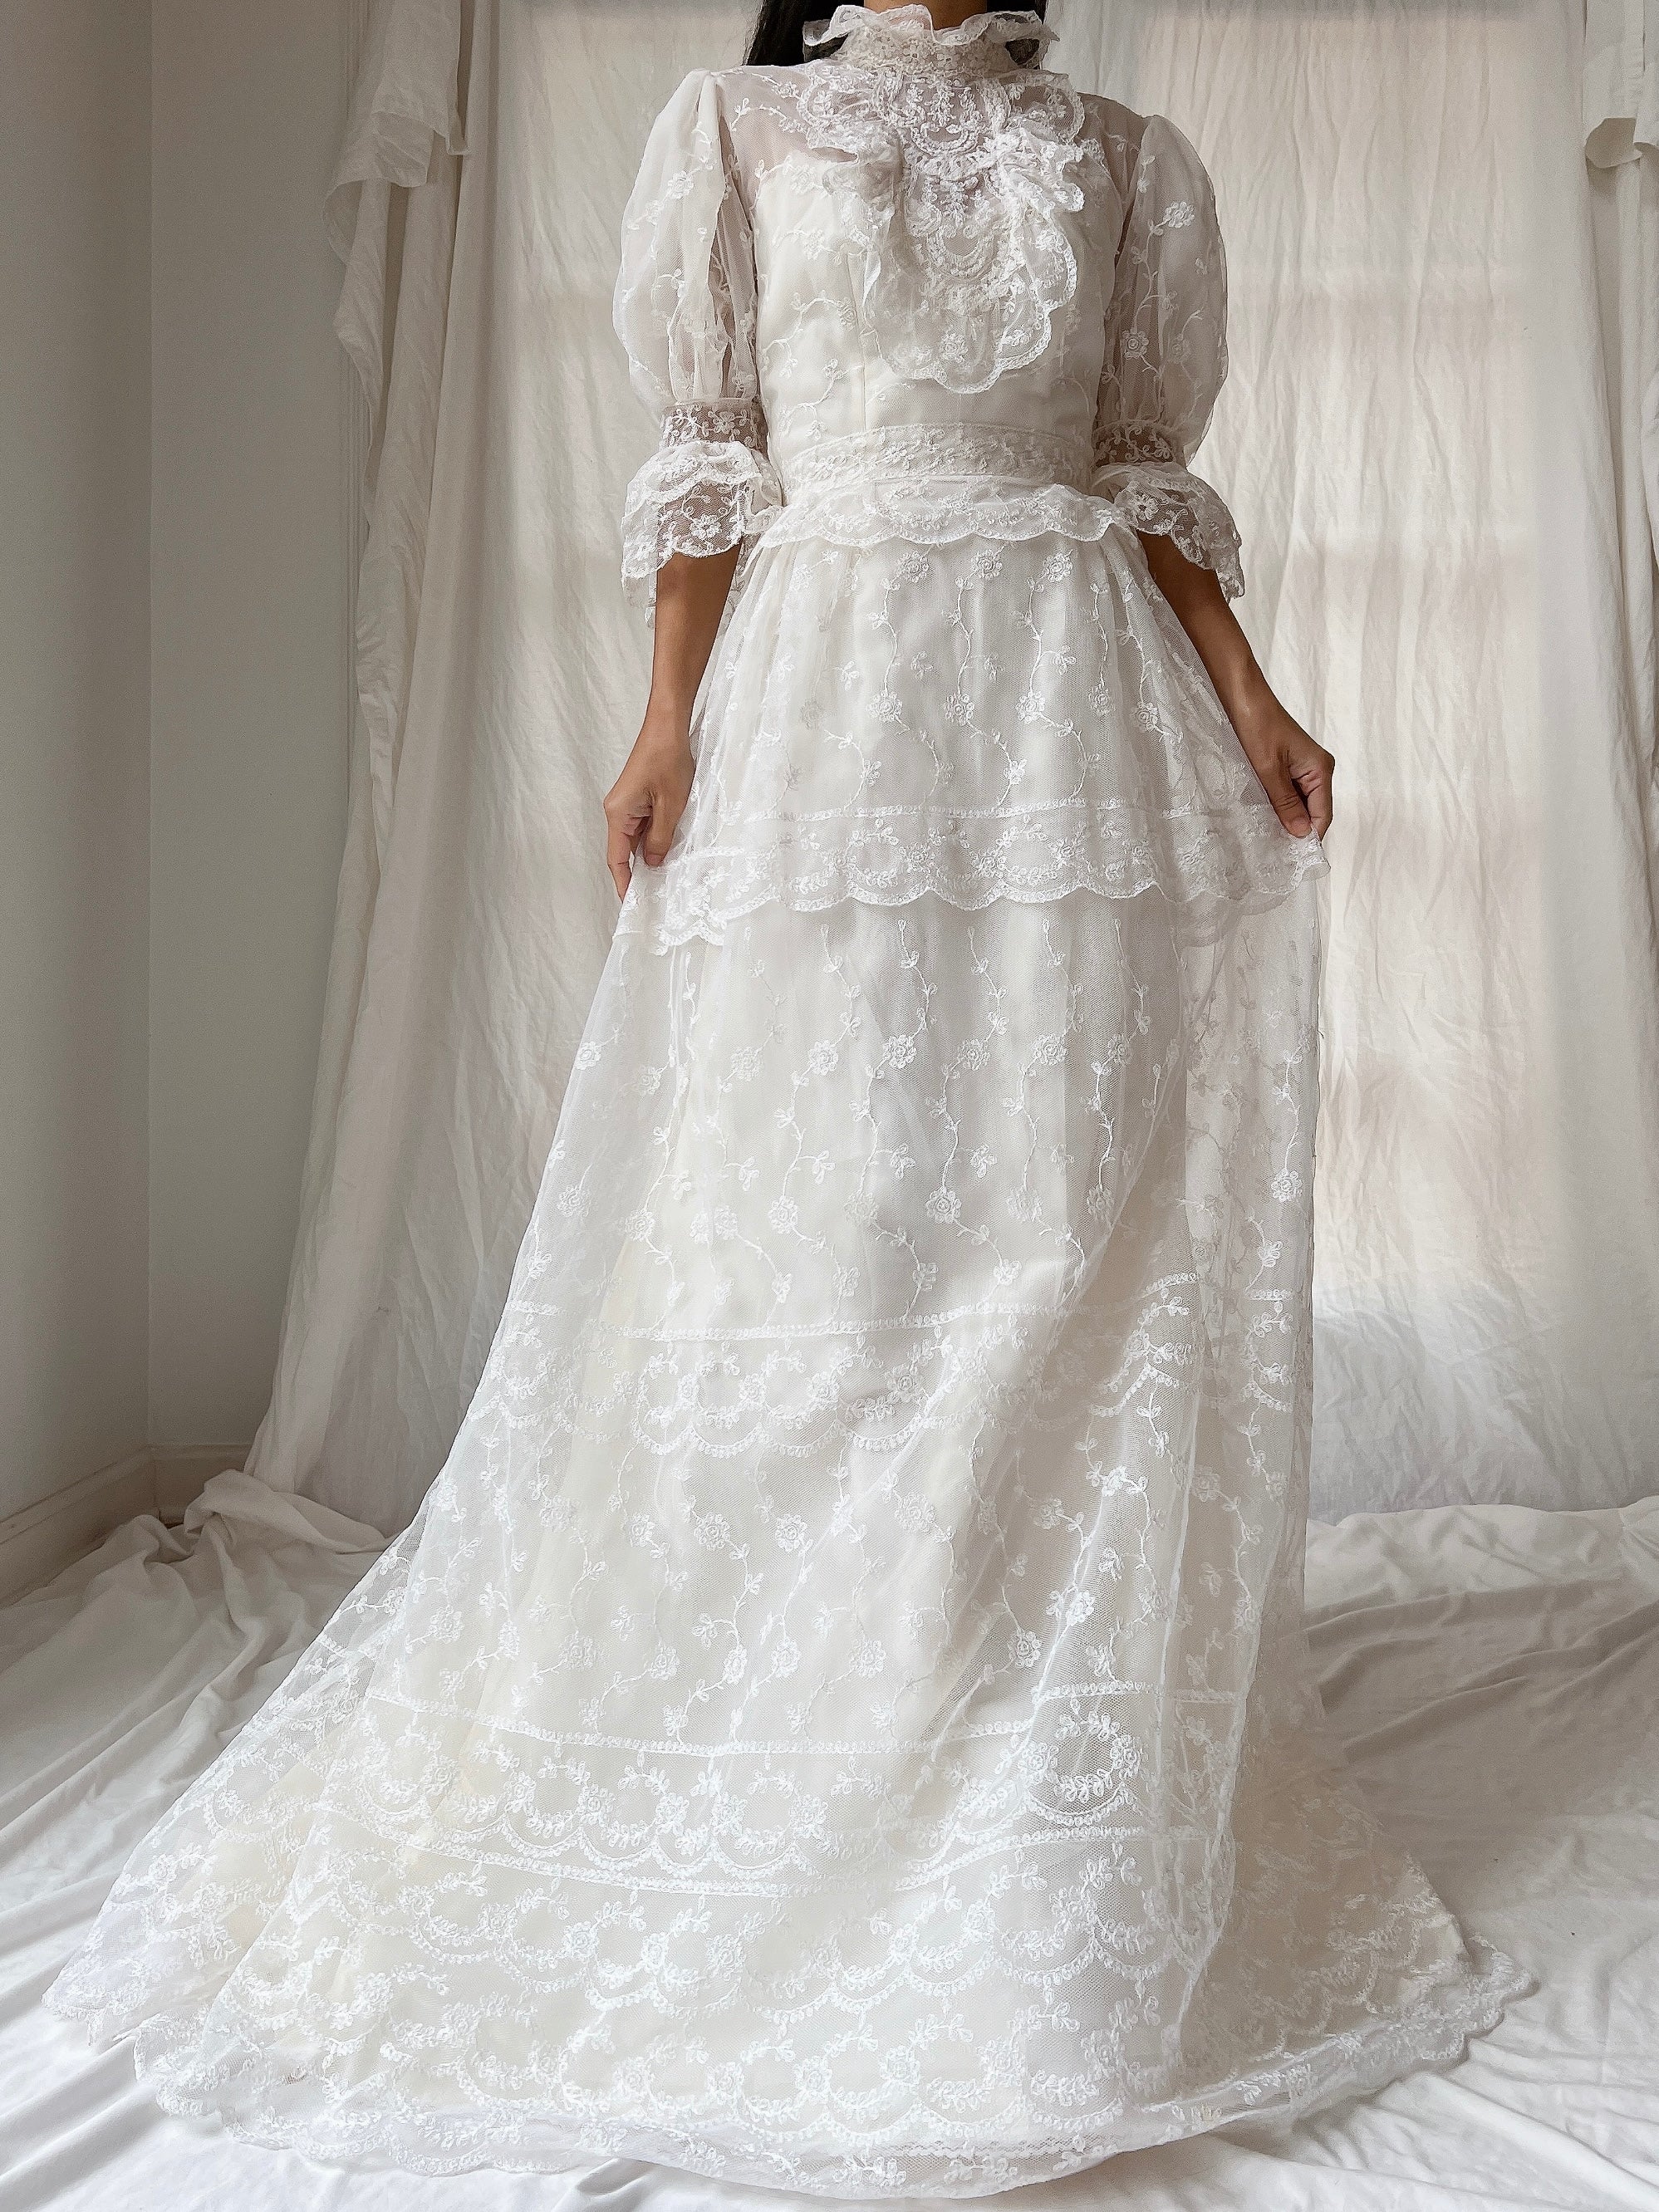 Vintage Needle Lace Puff Sleeve Gown - S